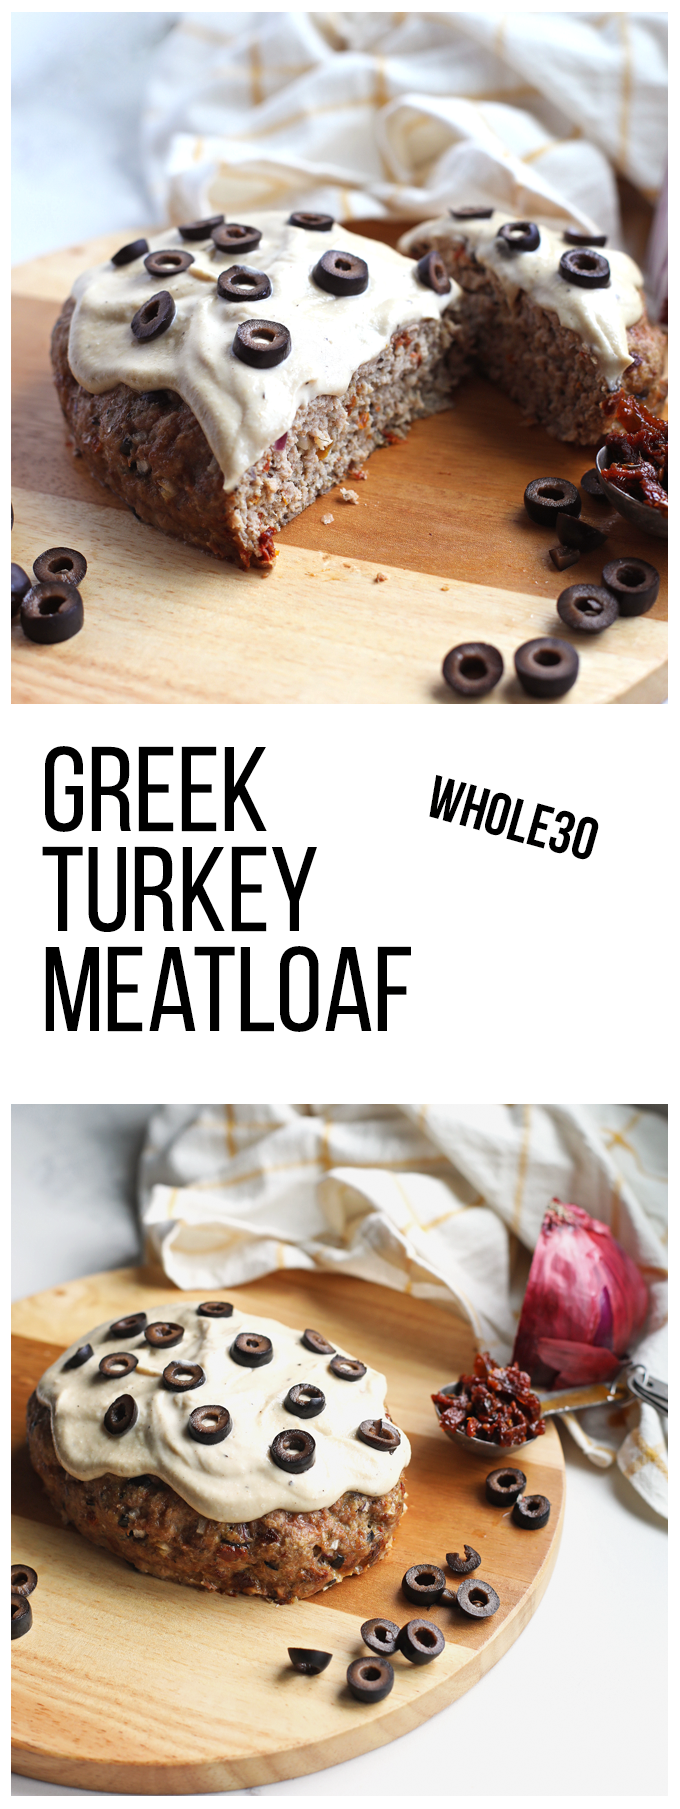 This Greek Turkey Meatloaf is whole30 compliant and super easy to whip together any night of the week!